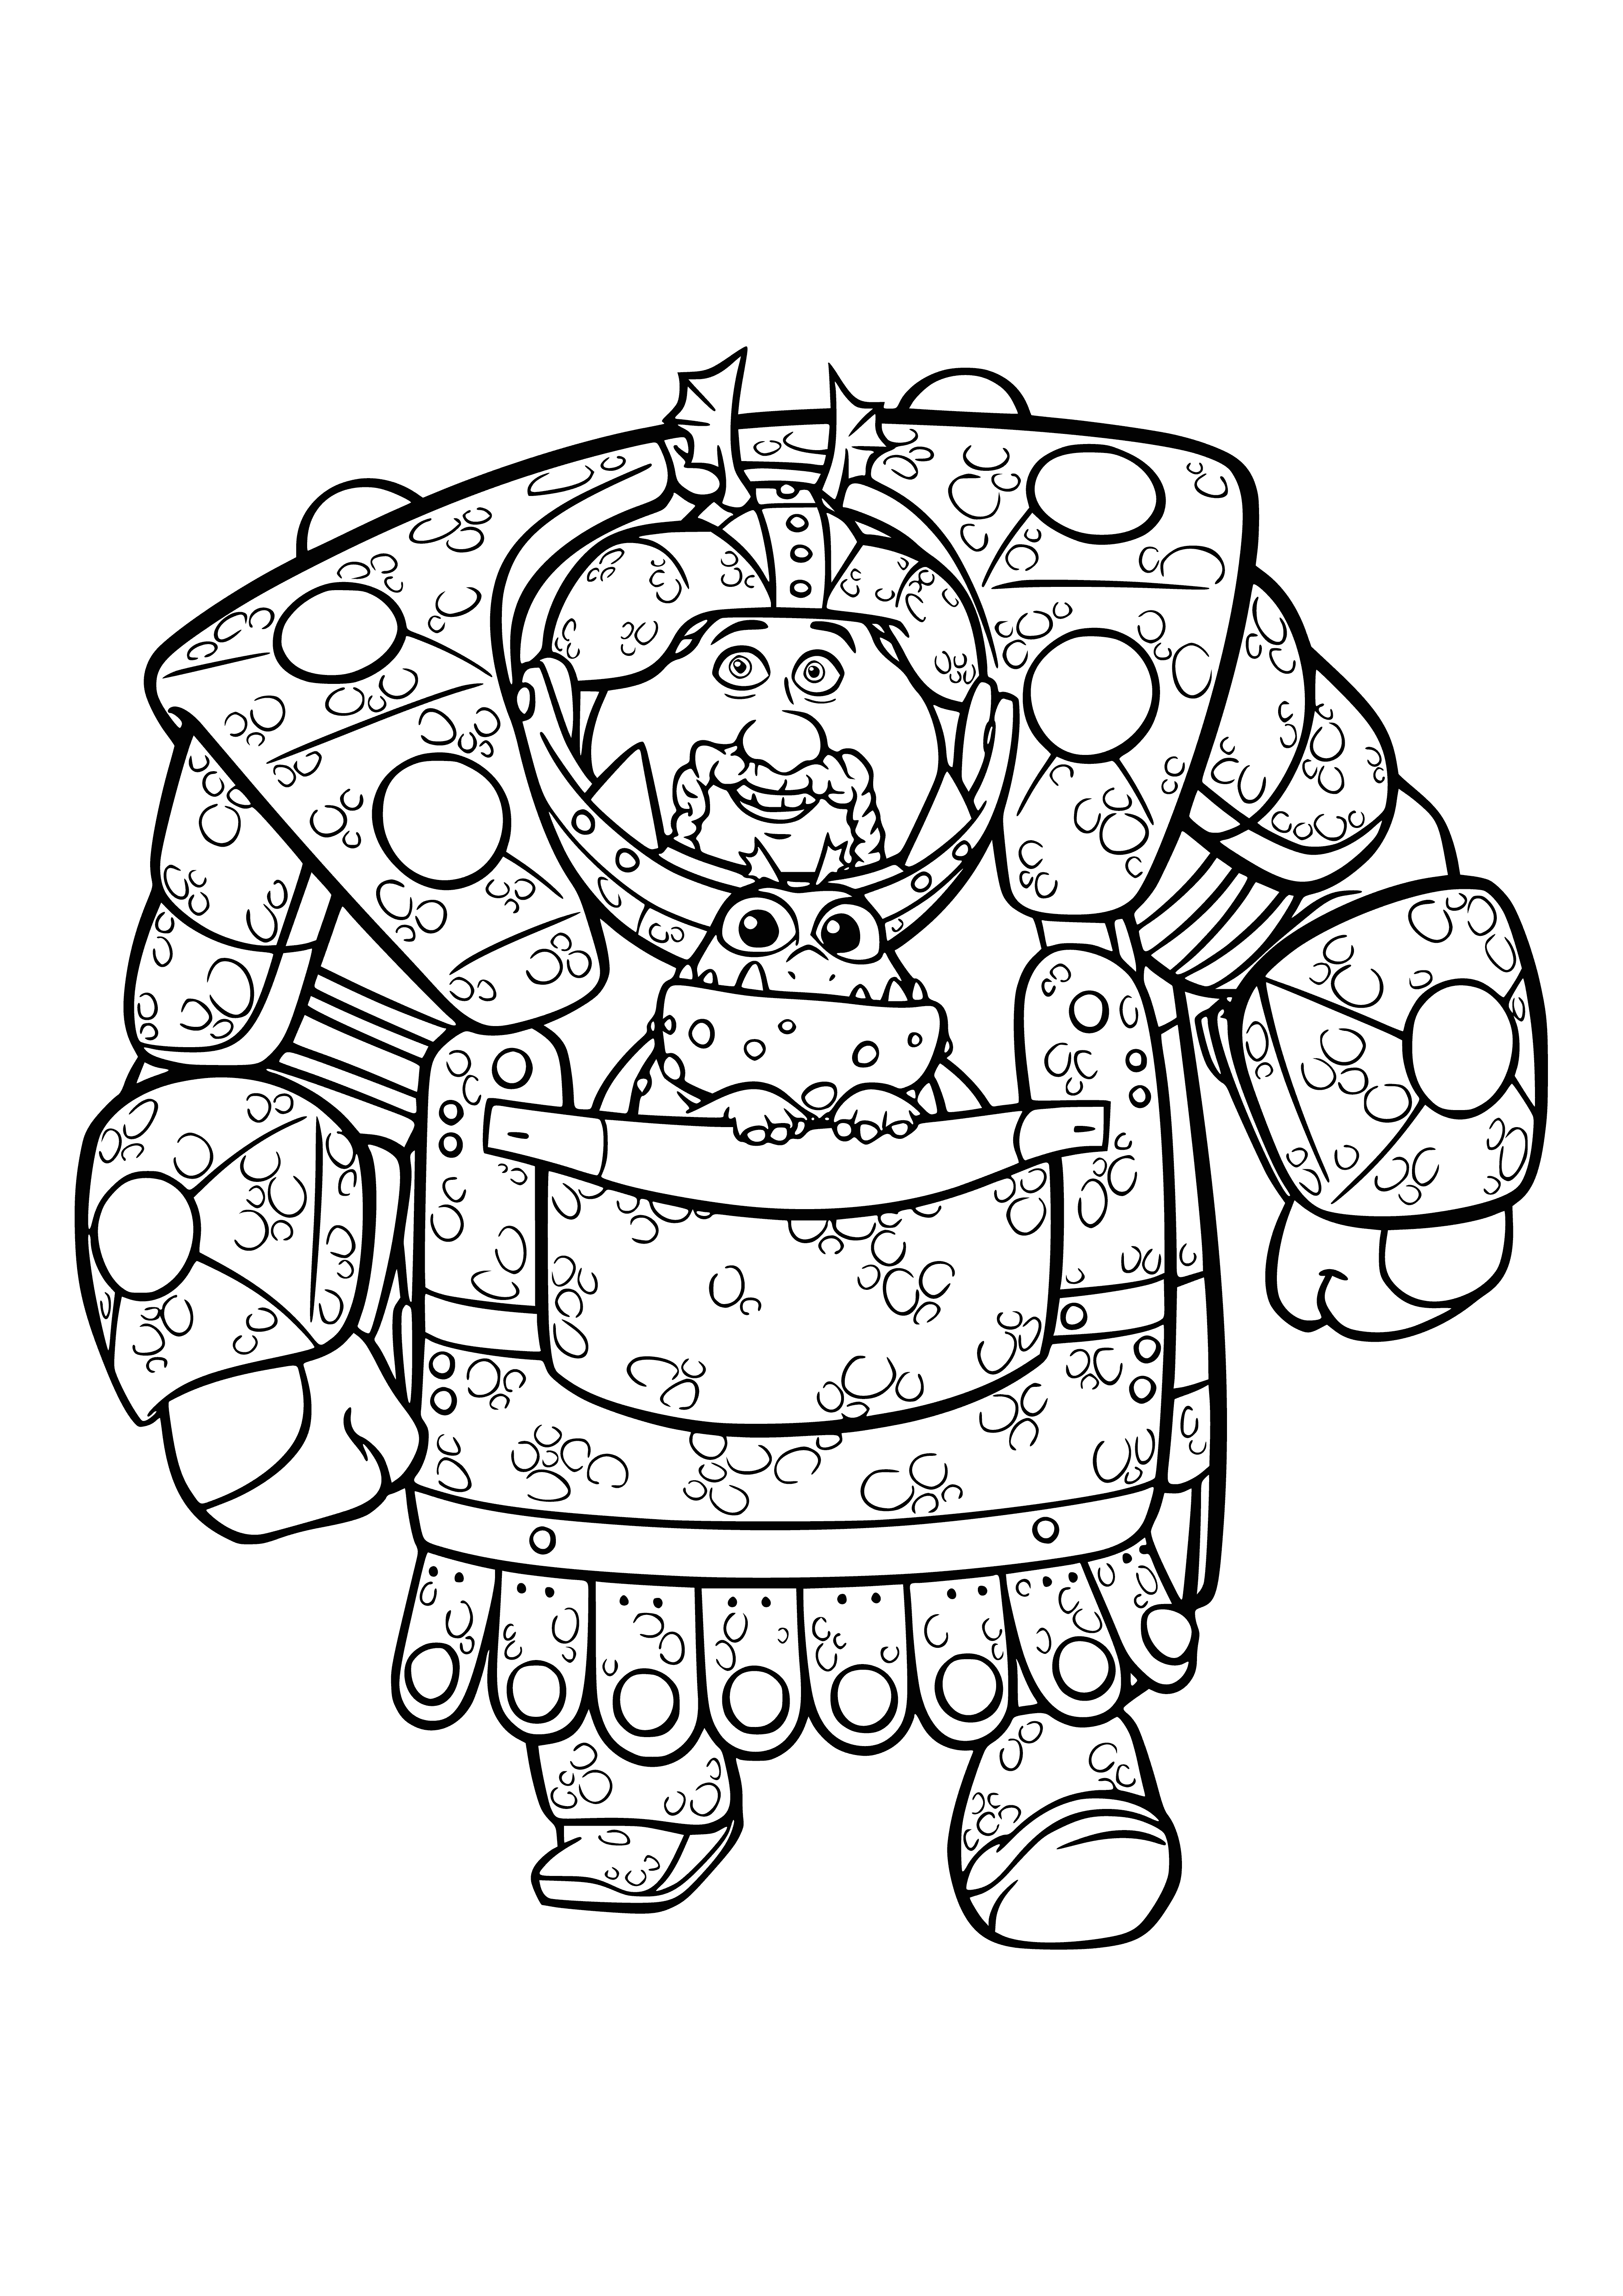 Fishlegs coloring page